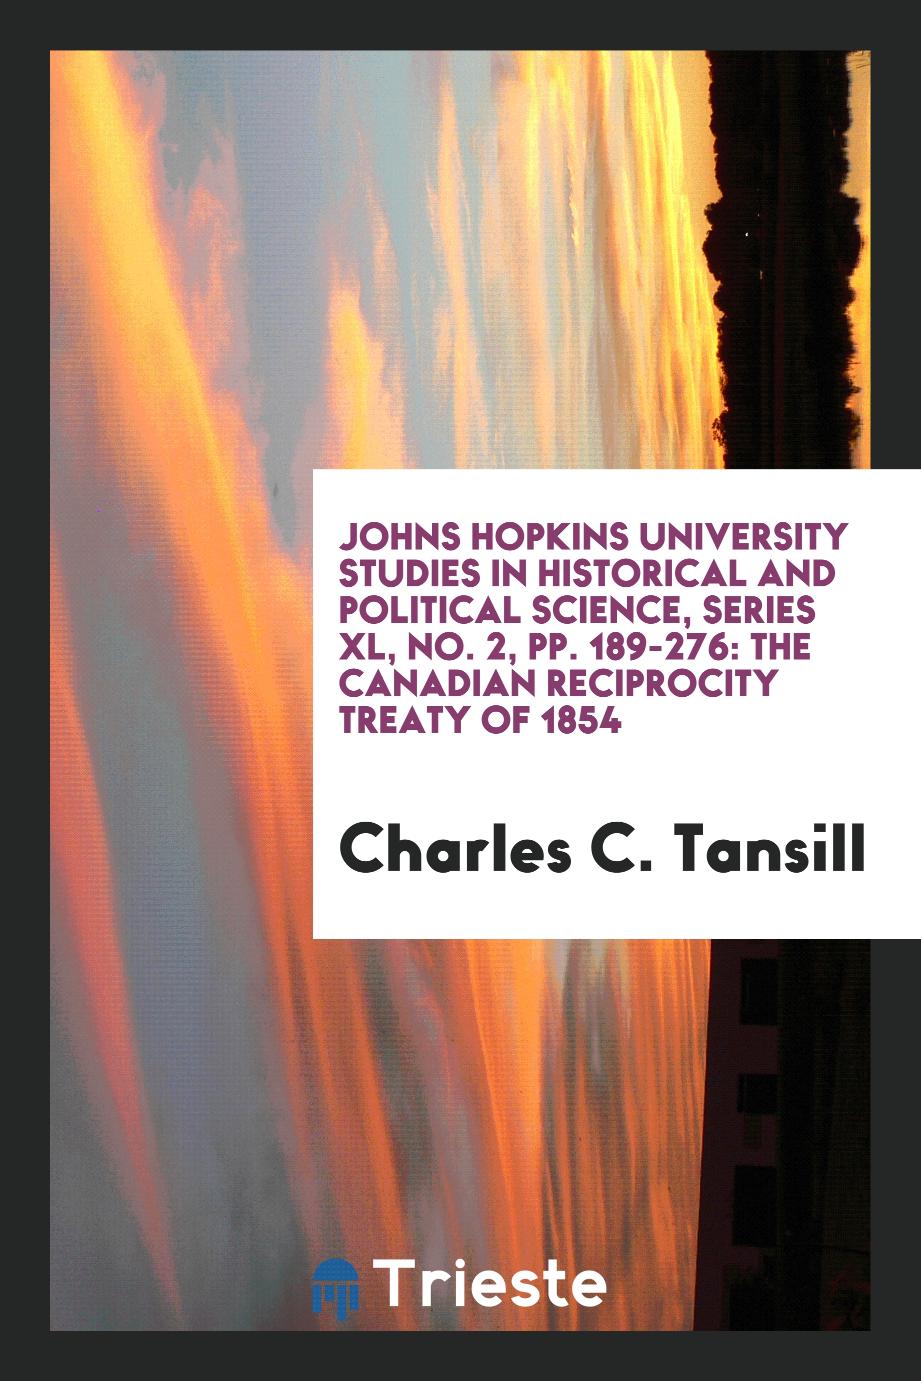 Johns Hopkins University Studies in Historical and Political Science, Series XL, No. 2, pp. 189-276: The Canadian Reciprocity Treaty of 1854